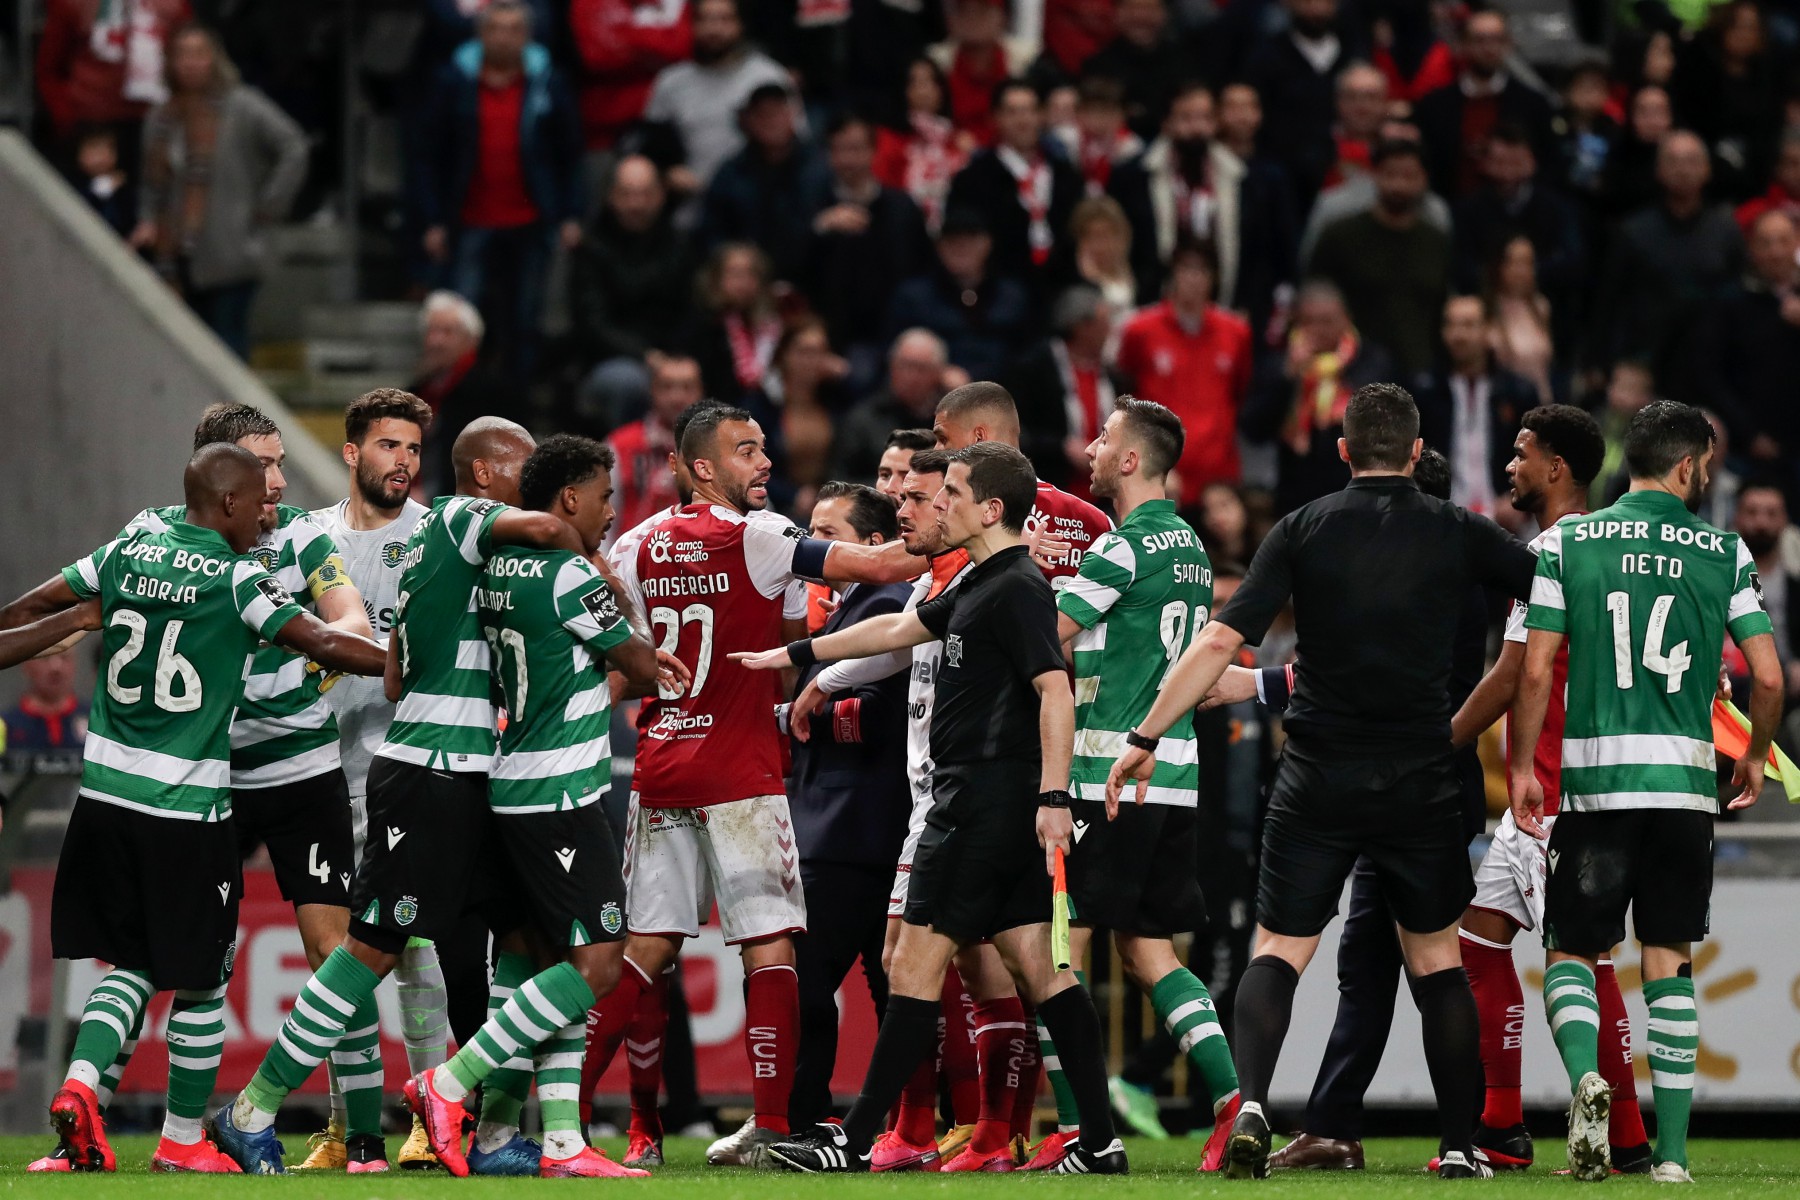 Tempers flared during the Primeira Liga clash as Braga won 2-0 to leapfrog Sporting into third